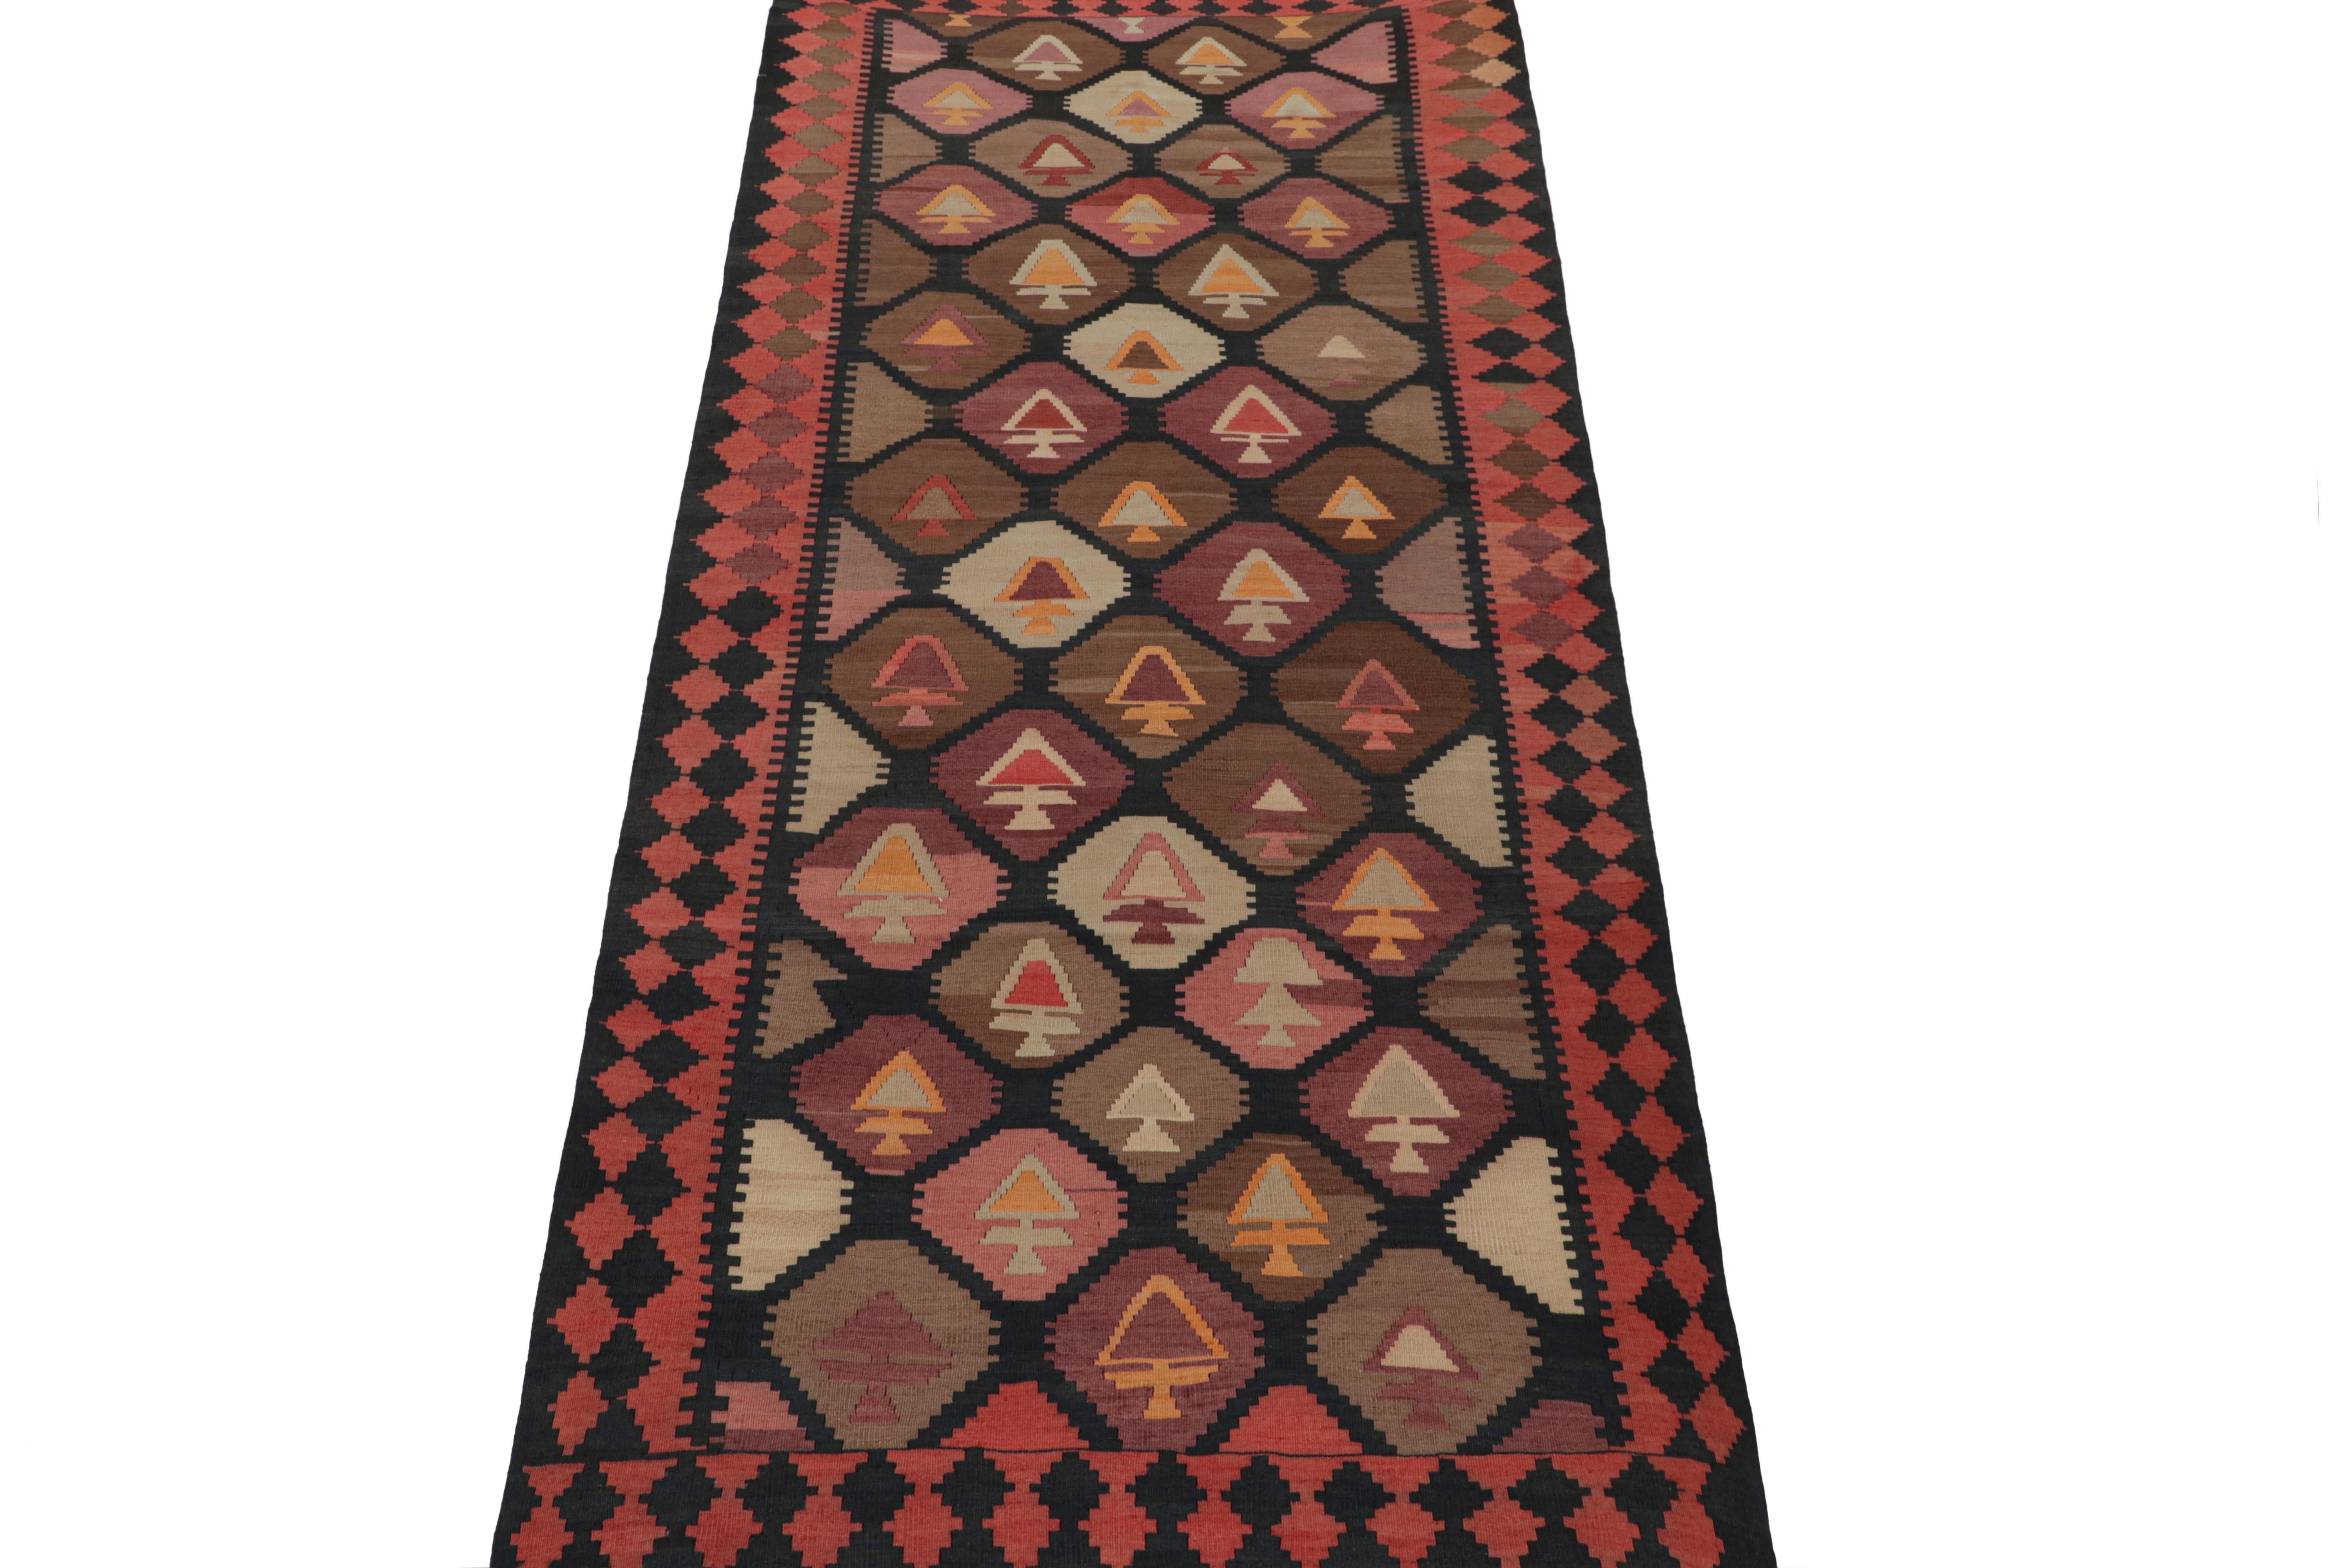 This vintage 5x12 Persian Kilim is a tribal rug from Meshkin—a small northwest village known for its fabulous works. Handwoven in wool, it originates circa 1950-1960. 

On the Design:

Its design enjoys a complementary play of rich brown, black